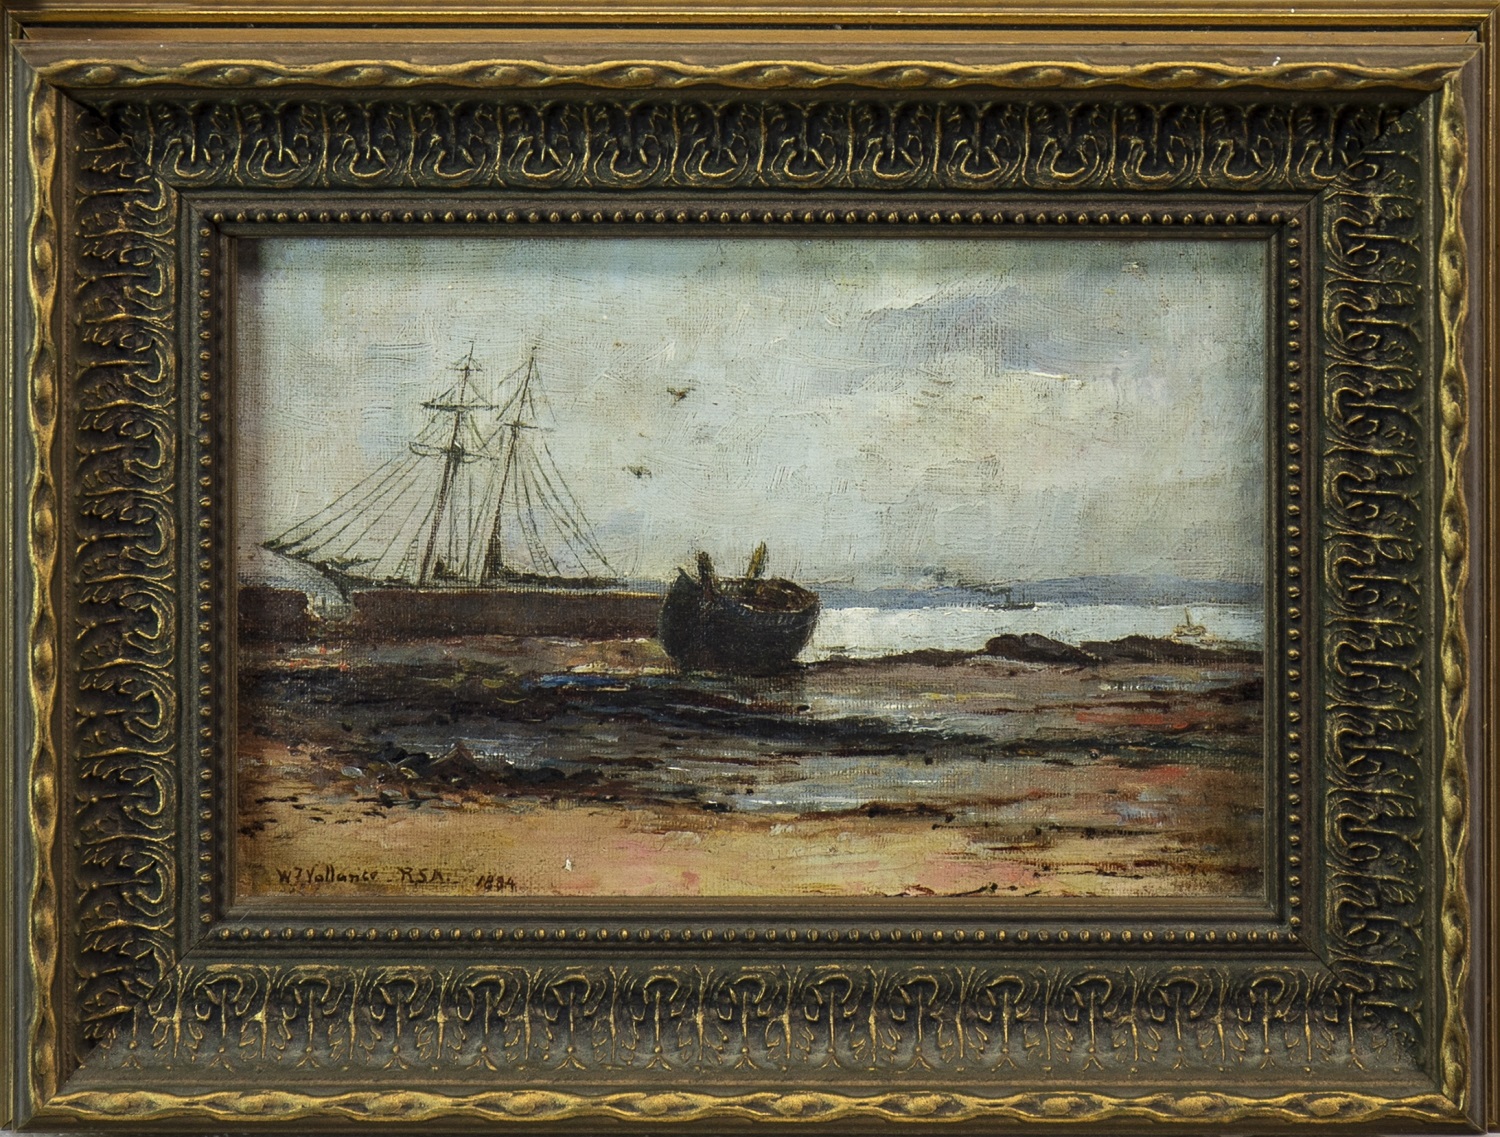 BEACHED BOAT, AN OIL BY WILLIAM FLEMING VALLANCE